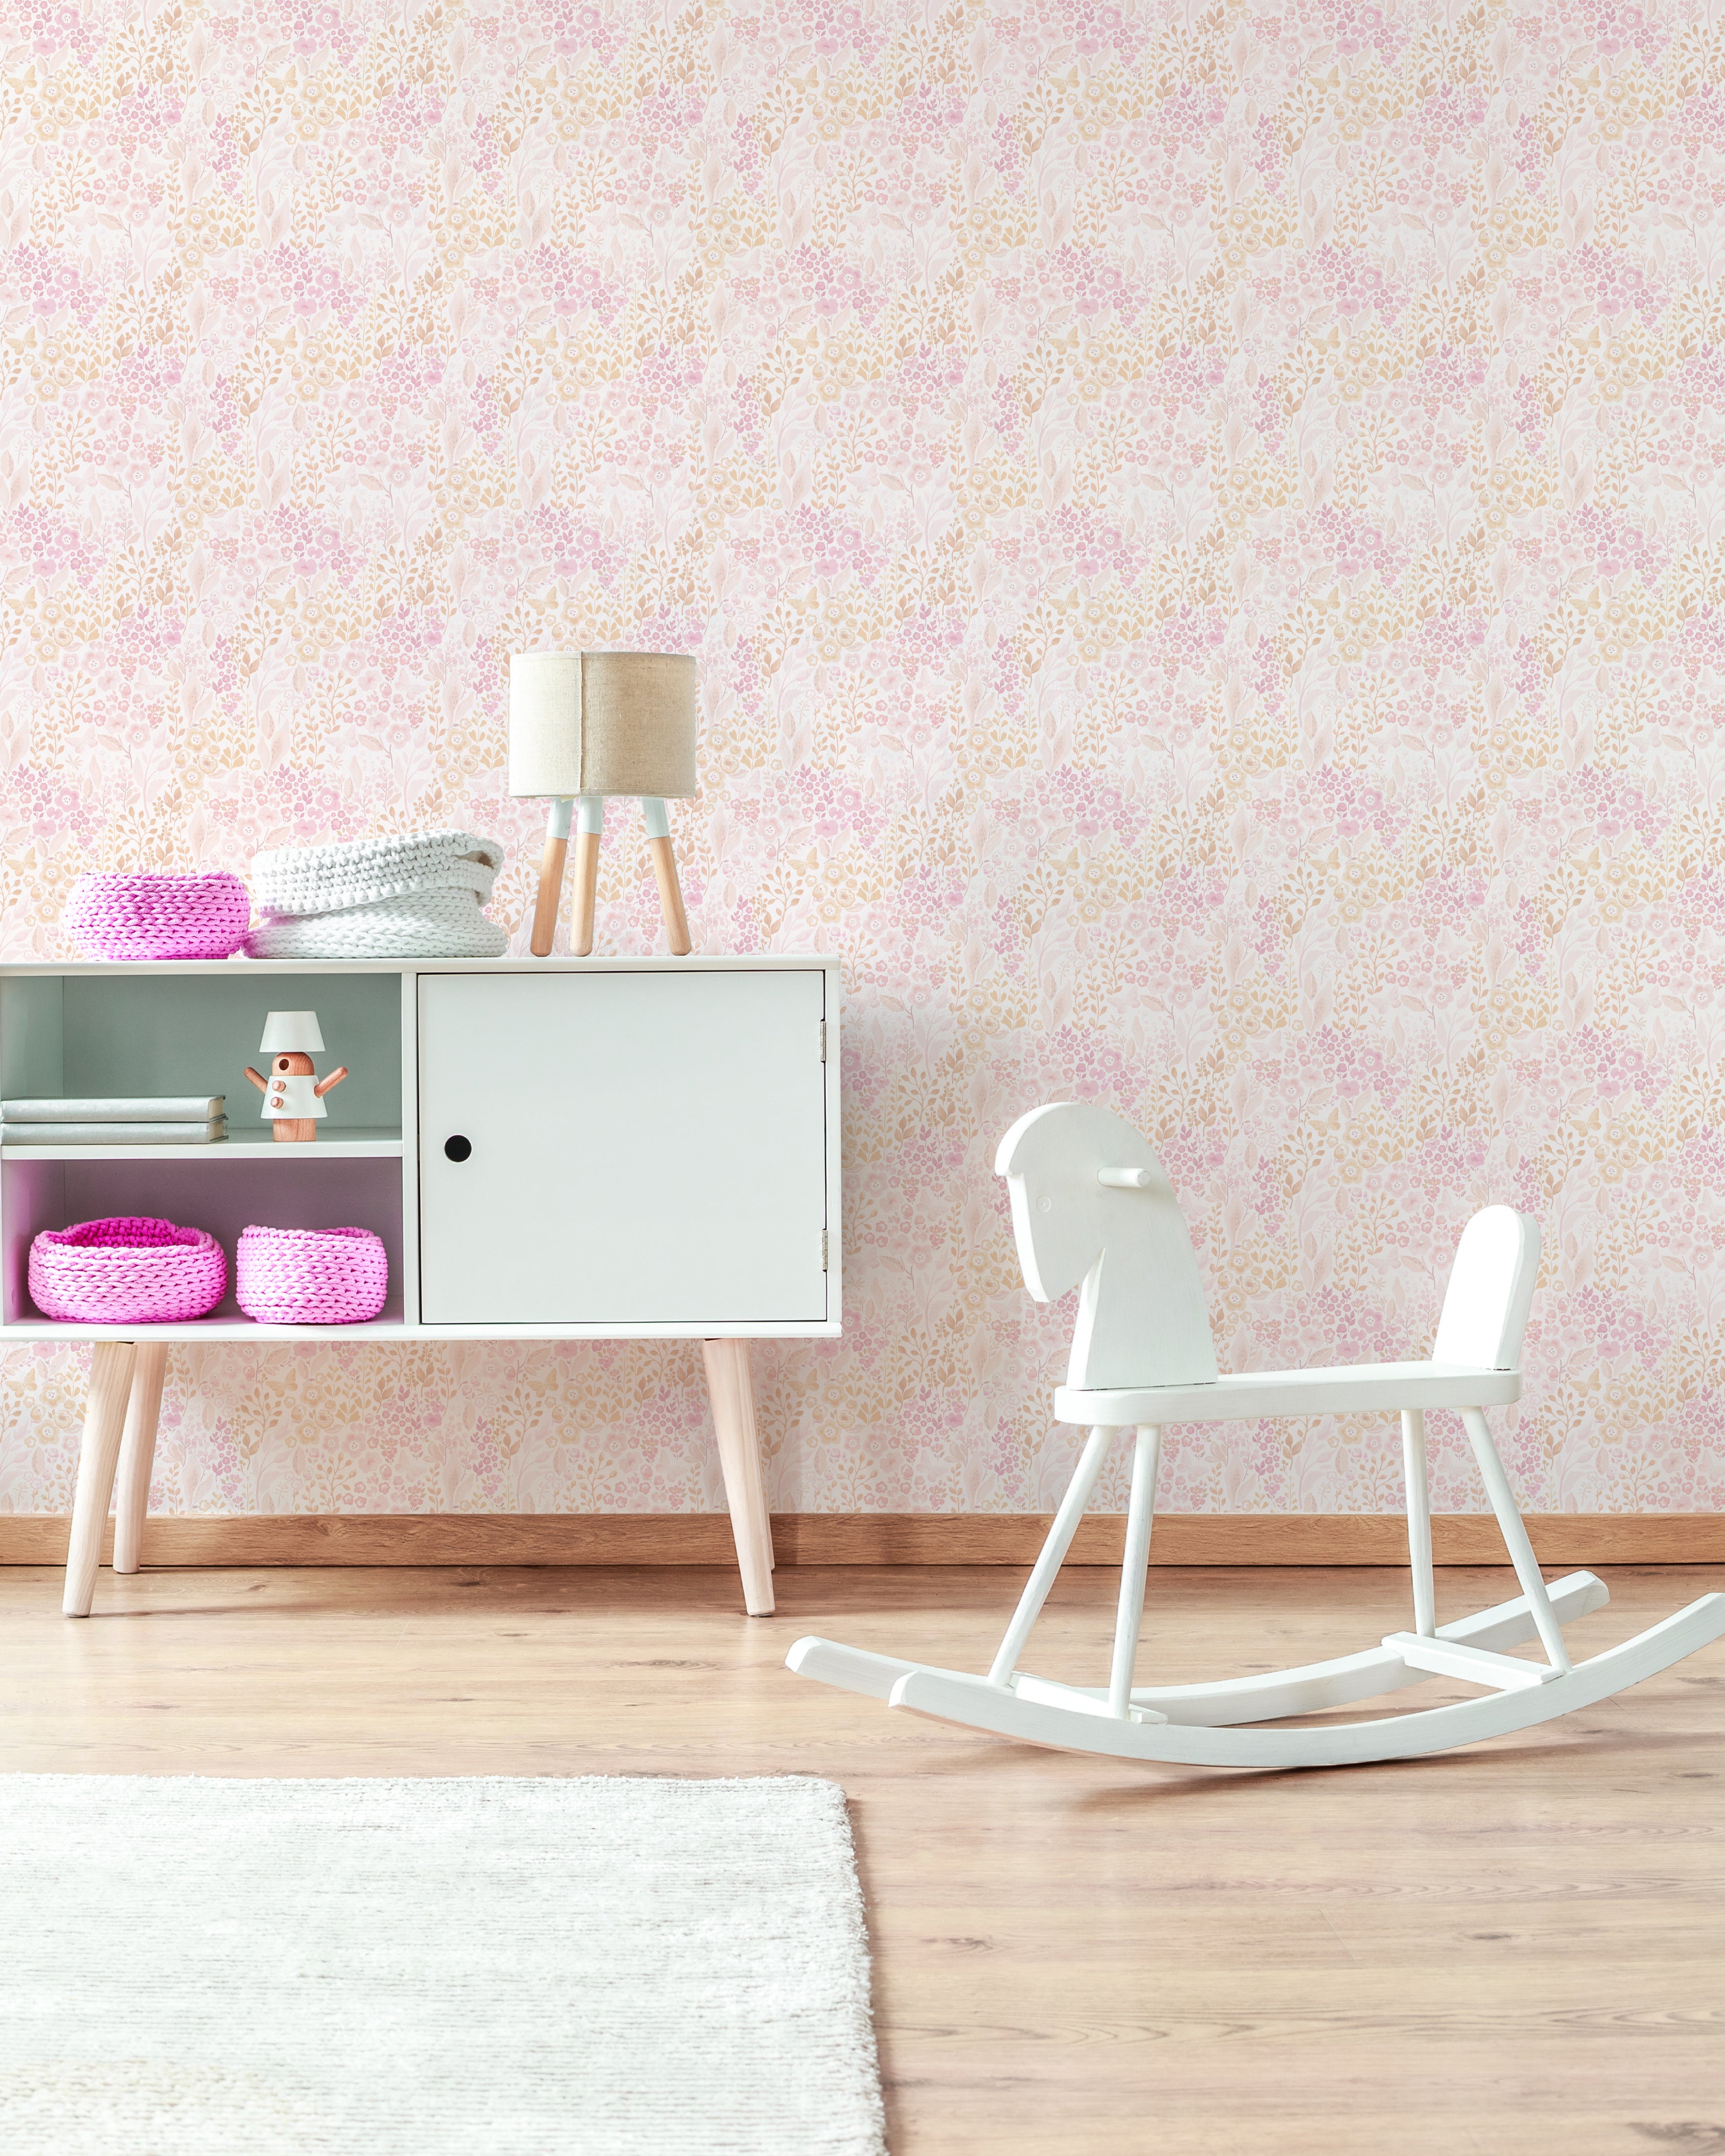 a child's room with "Pretty Petals Wallpaper - 12.5" on the wall. The wallpaper is adorned with a delicate floral pattern in shades of pink and beige, creating a soft, pastel backdrop. The room features a white modern rocking horse, a sideboard with colorful baskets, and a lamp with pink legs, conveying a playful yet stylish nursery design.